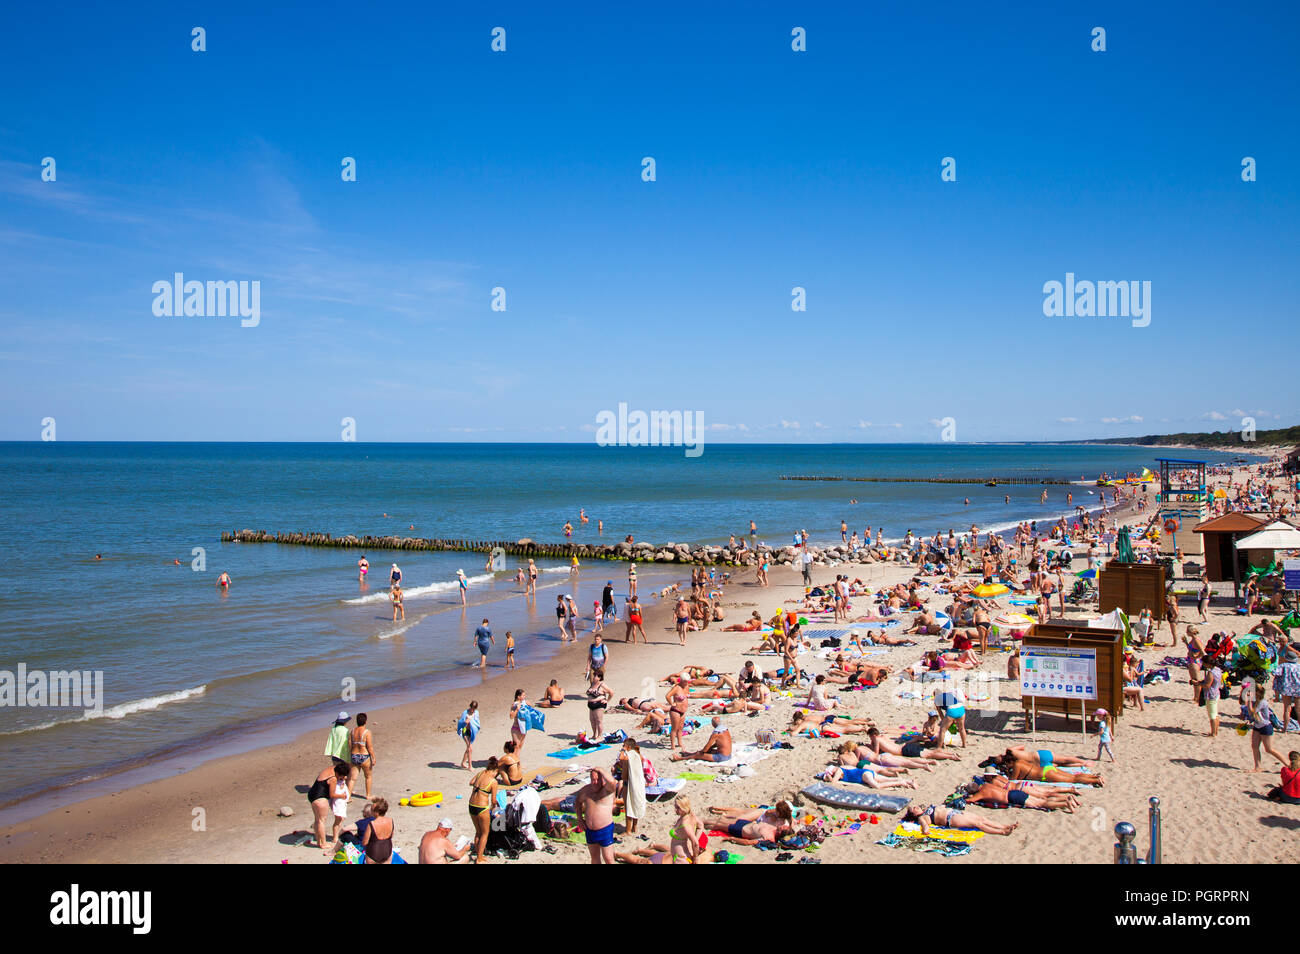 Zelenogradsk, Russia - August 17, 2017: A crowd of bathers in Zelenogradsk beach located on the Baltic Sea coast, Russia. Stock Photo